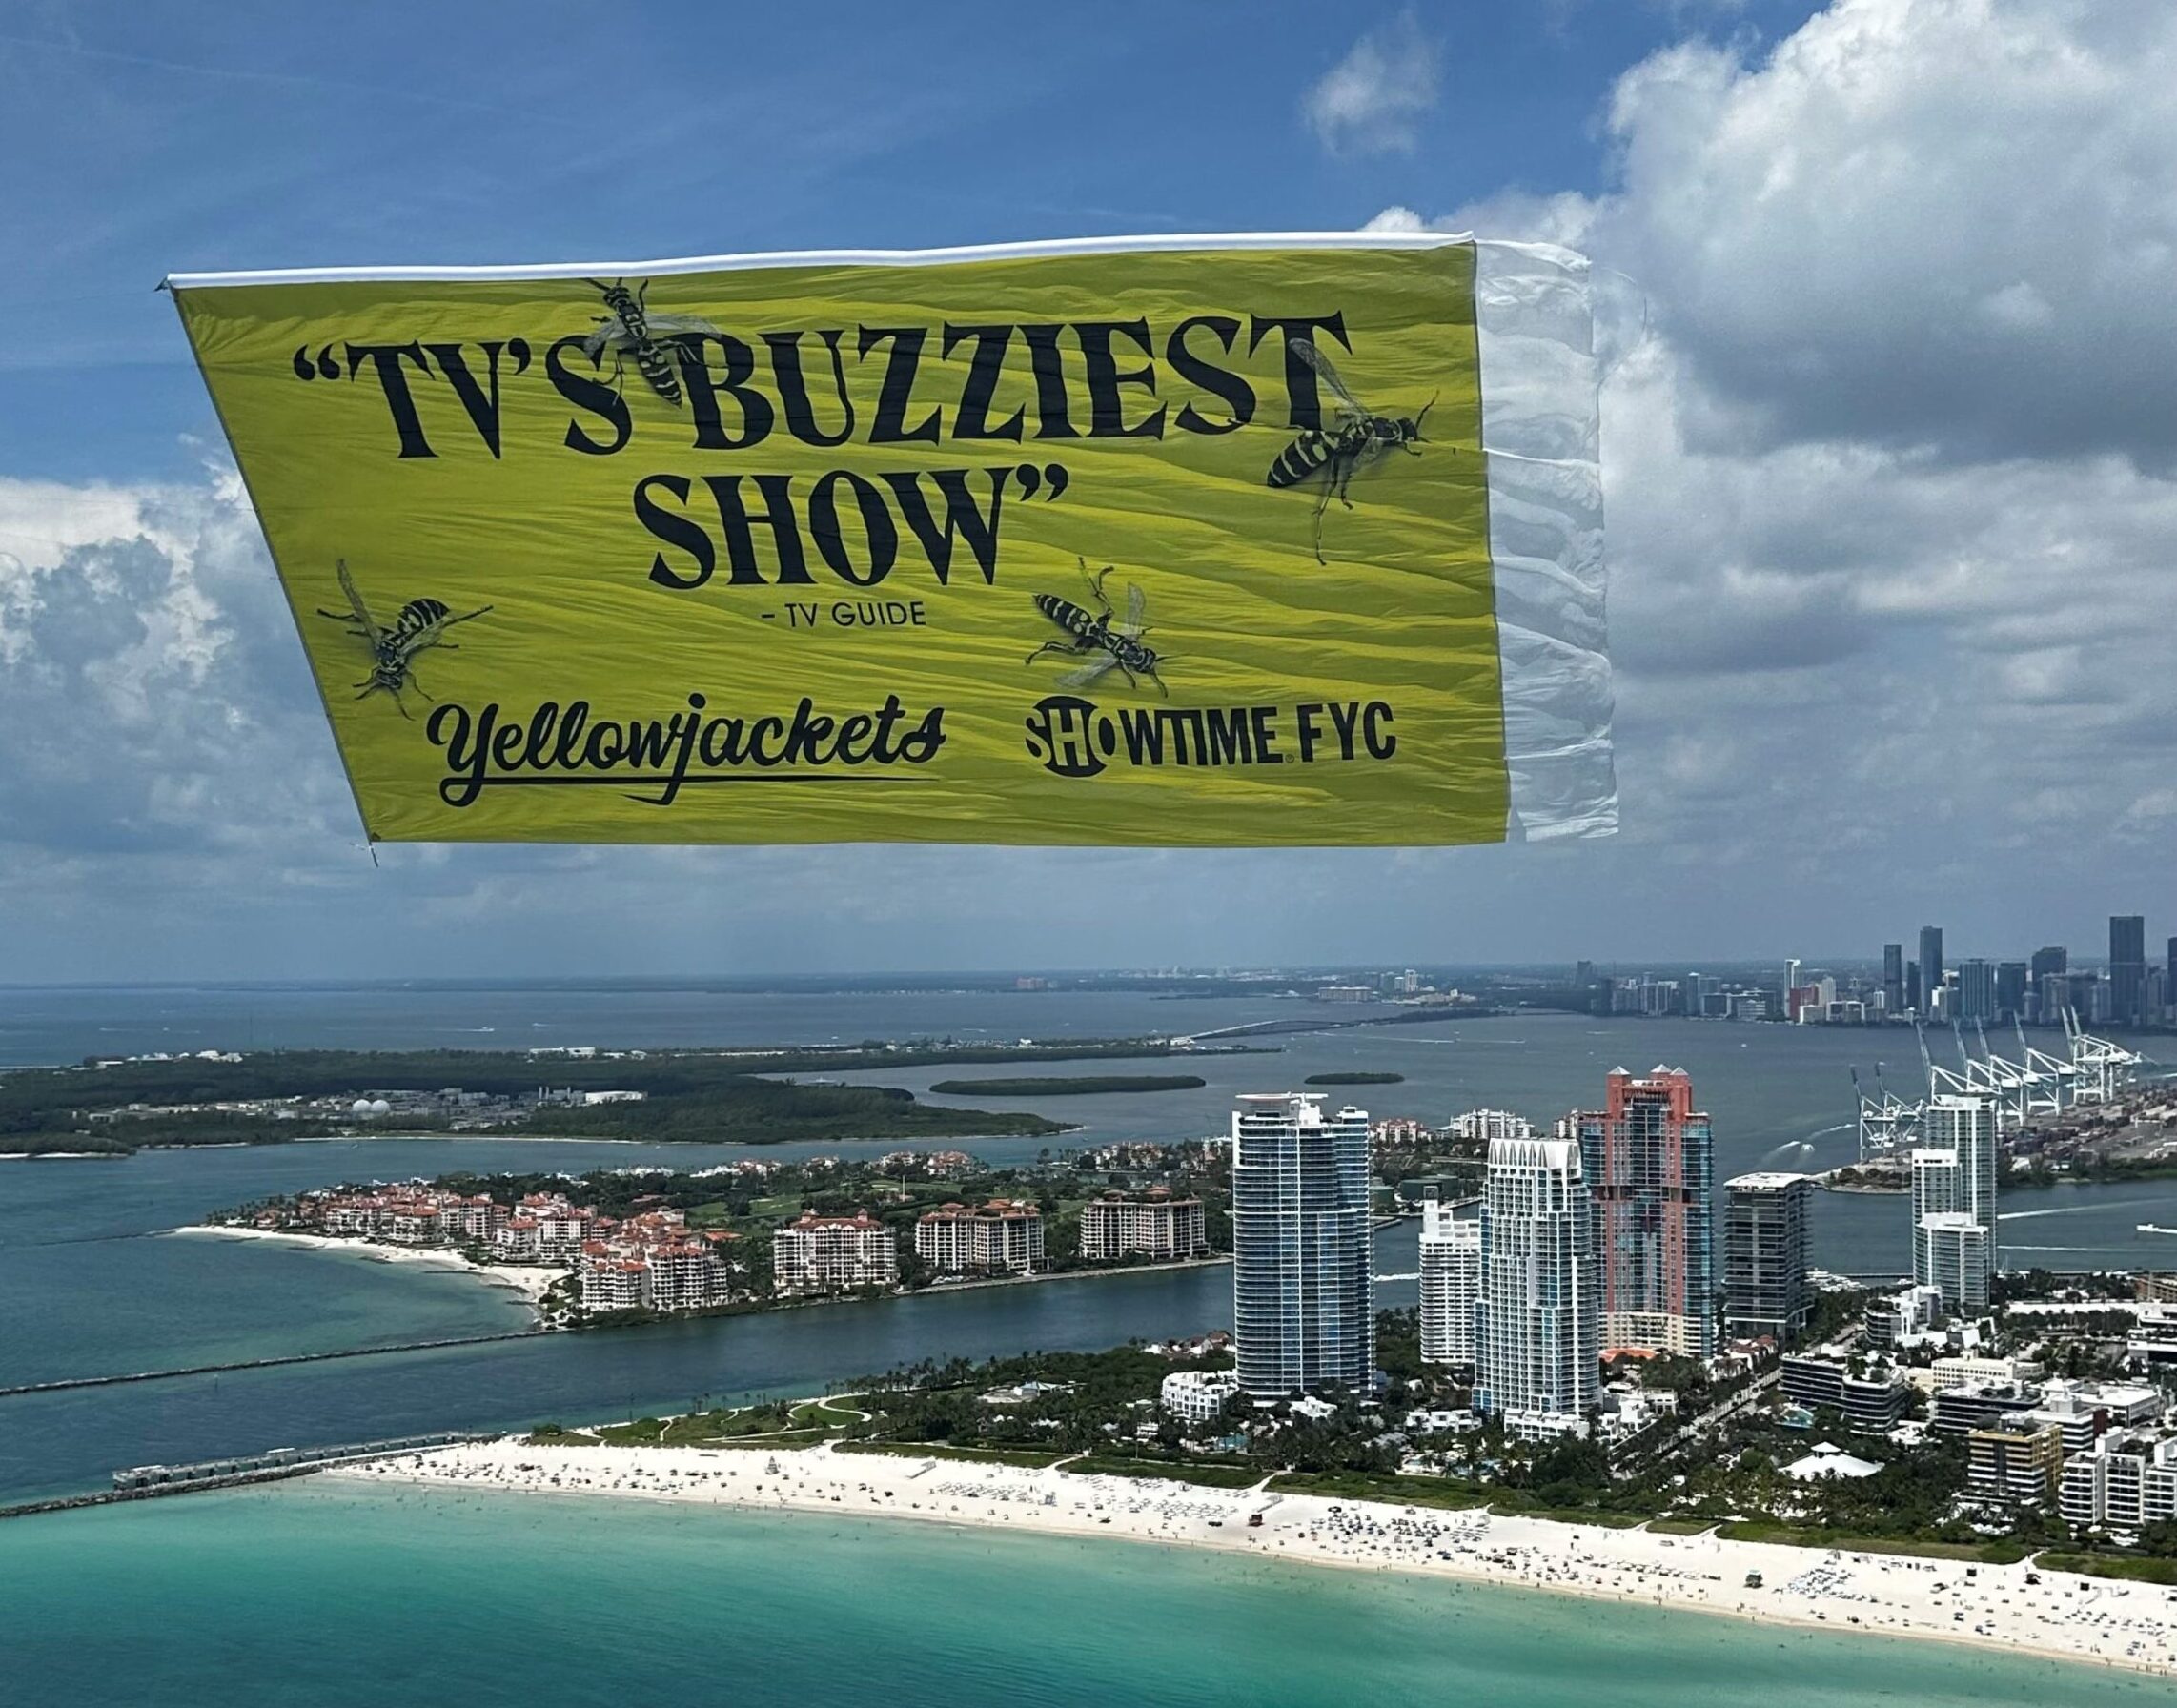 Colorful aerial billboard displaying aerial advertising for Showtime's Yellowjackets.